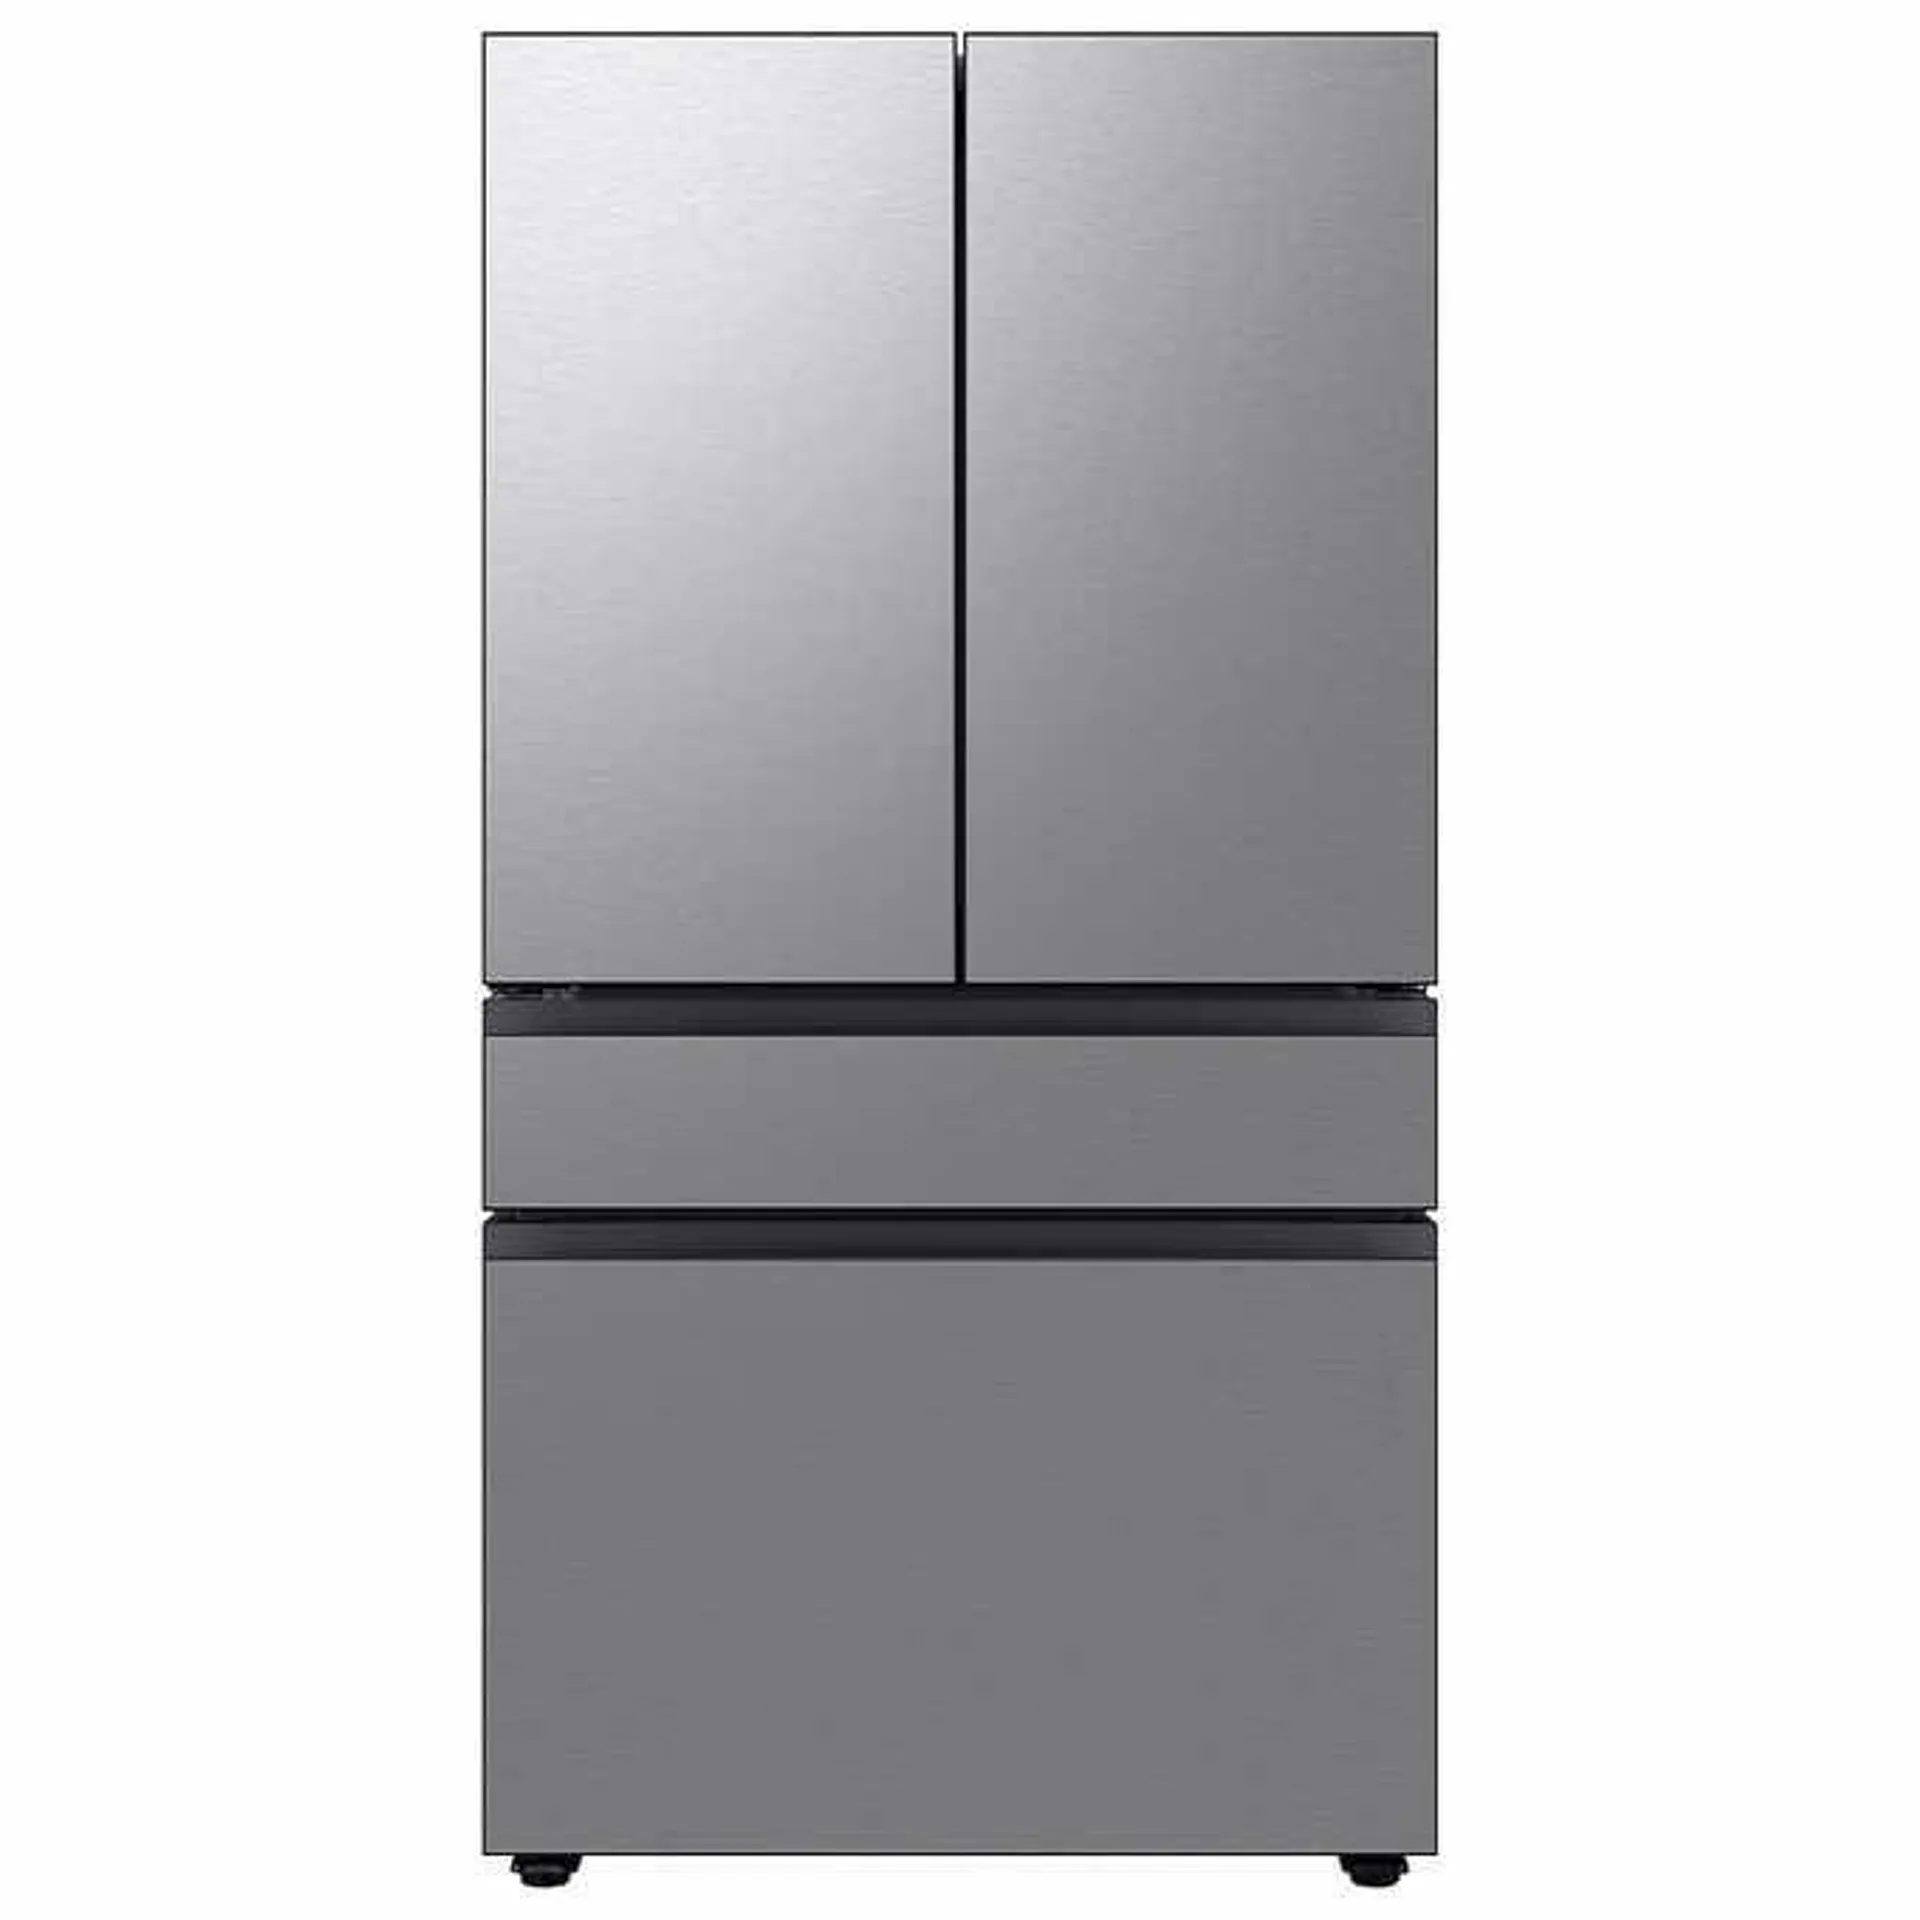 Samsung BESPOKE 36 in. 22.9 cu. ft. Stainless Steel 4 Door French Door Counter Depth Refrigerator with Interior Water Dispenser and Autofill Pitcher